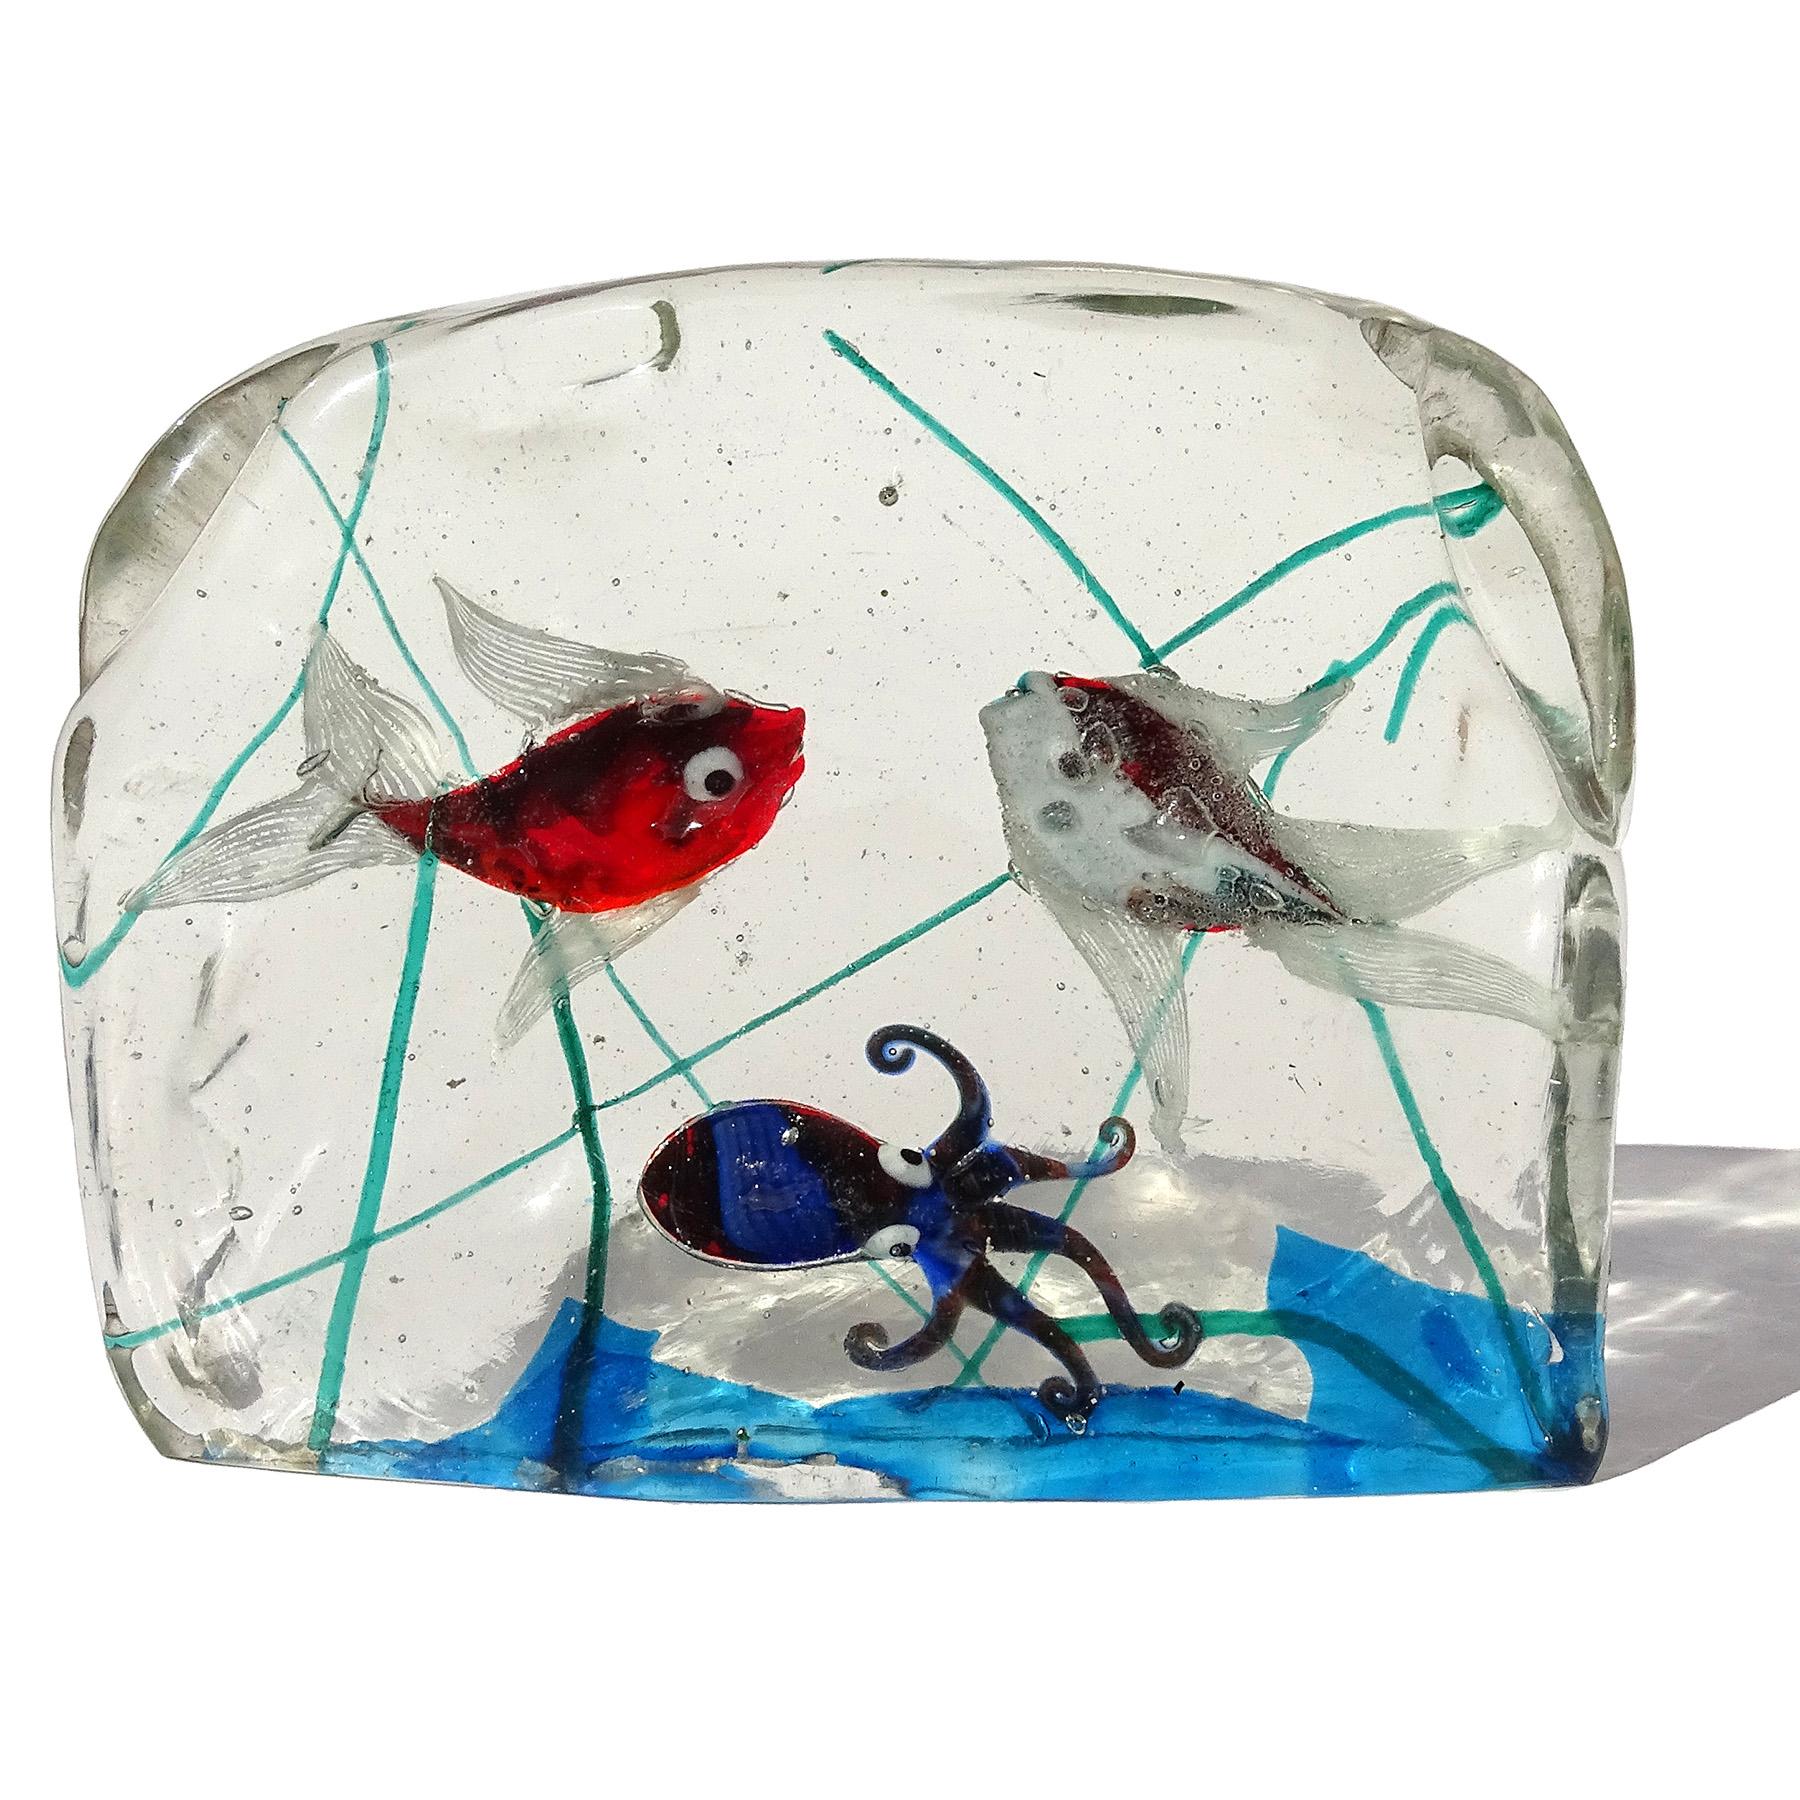 Beautiful vintage Murano hand blown Italian art glass double fish and octopus aquarium block sculpture. Created in the manner of the Cenedese and A.Ve.M. companies. One of the fish is bright red and deep red, with white ribbon fins. The other fish